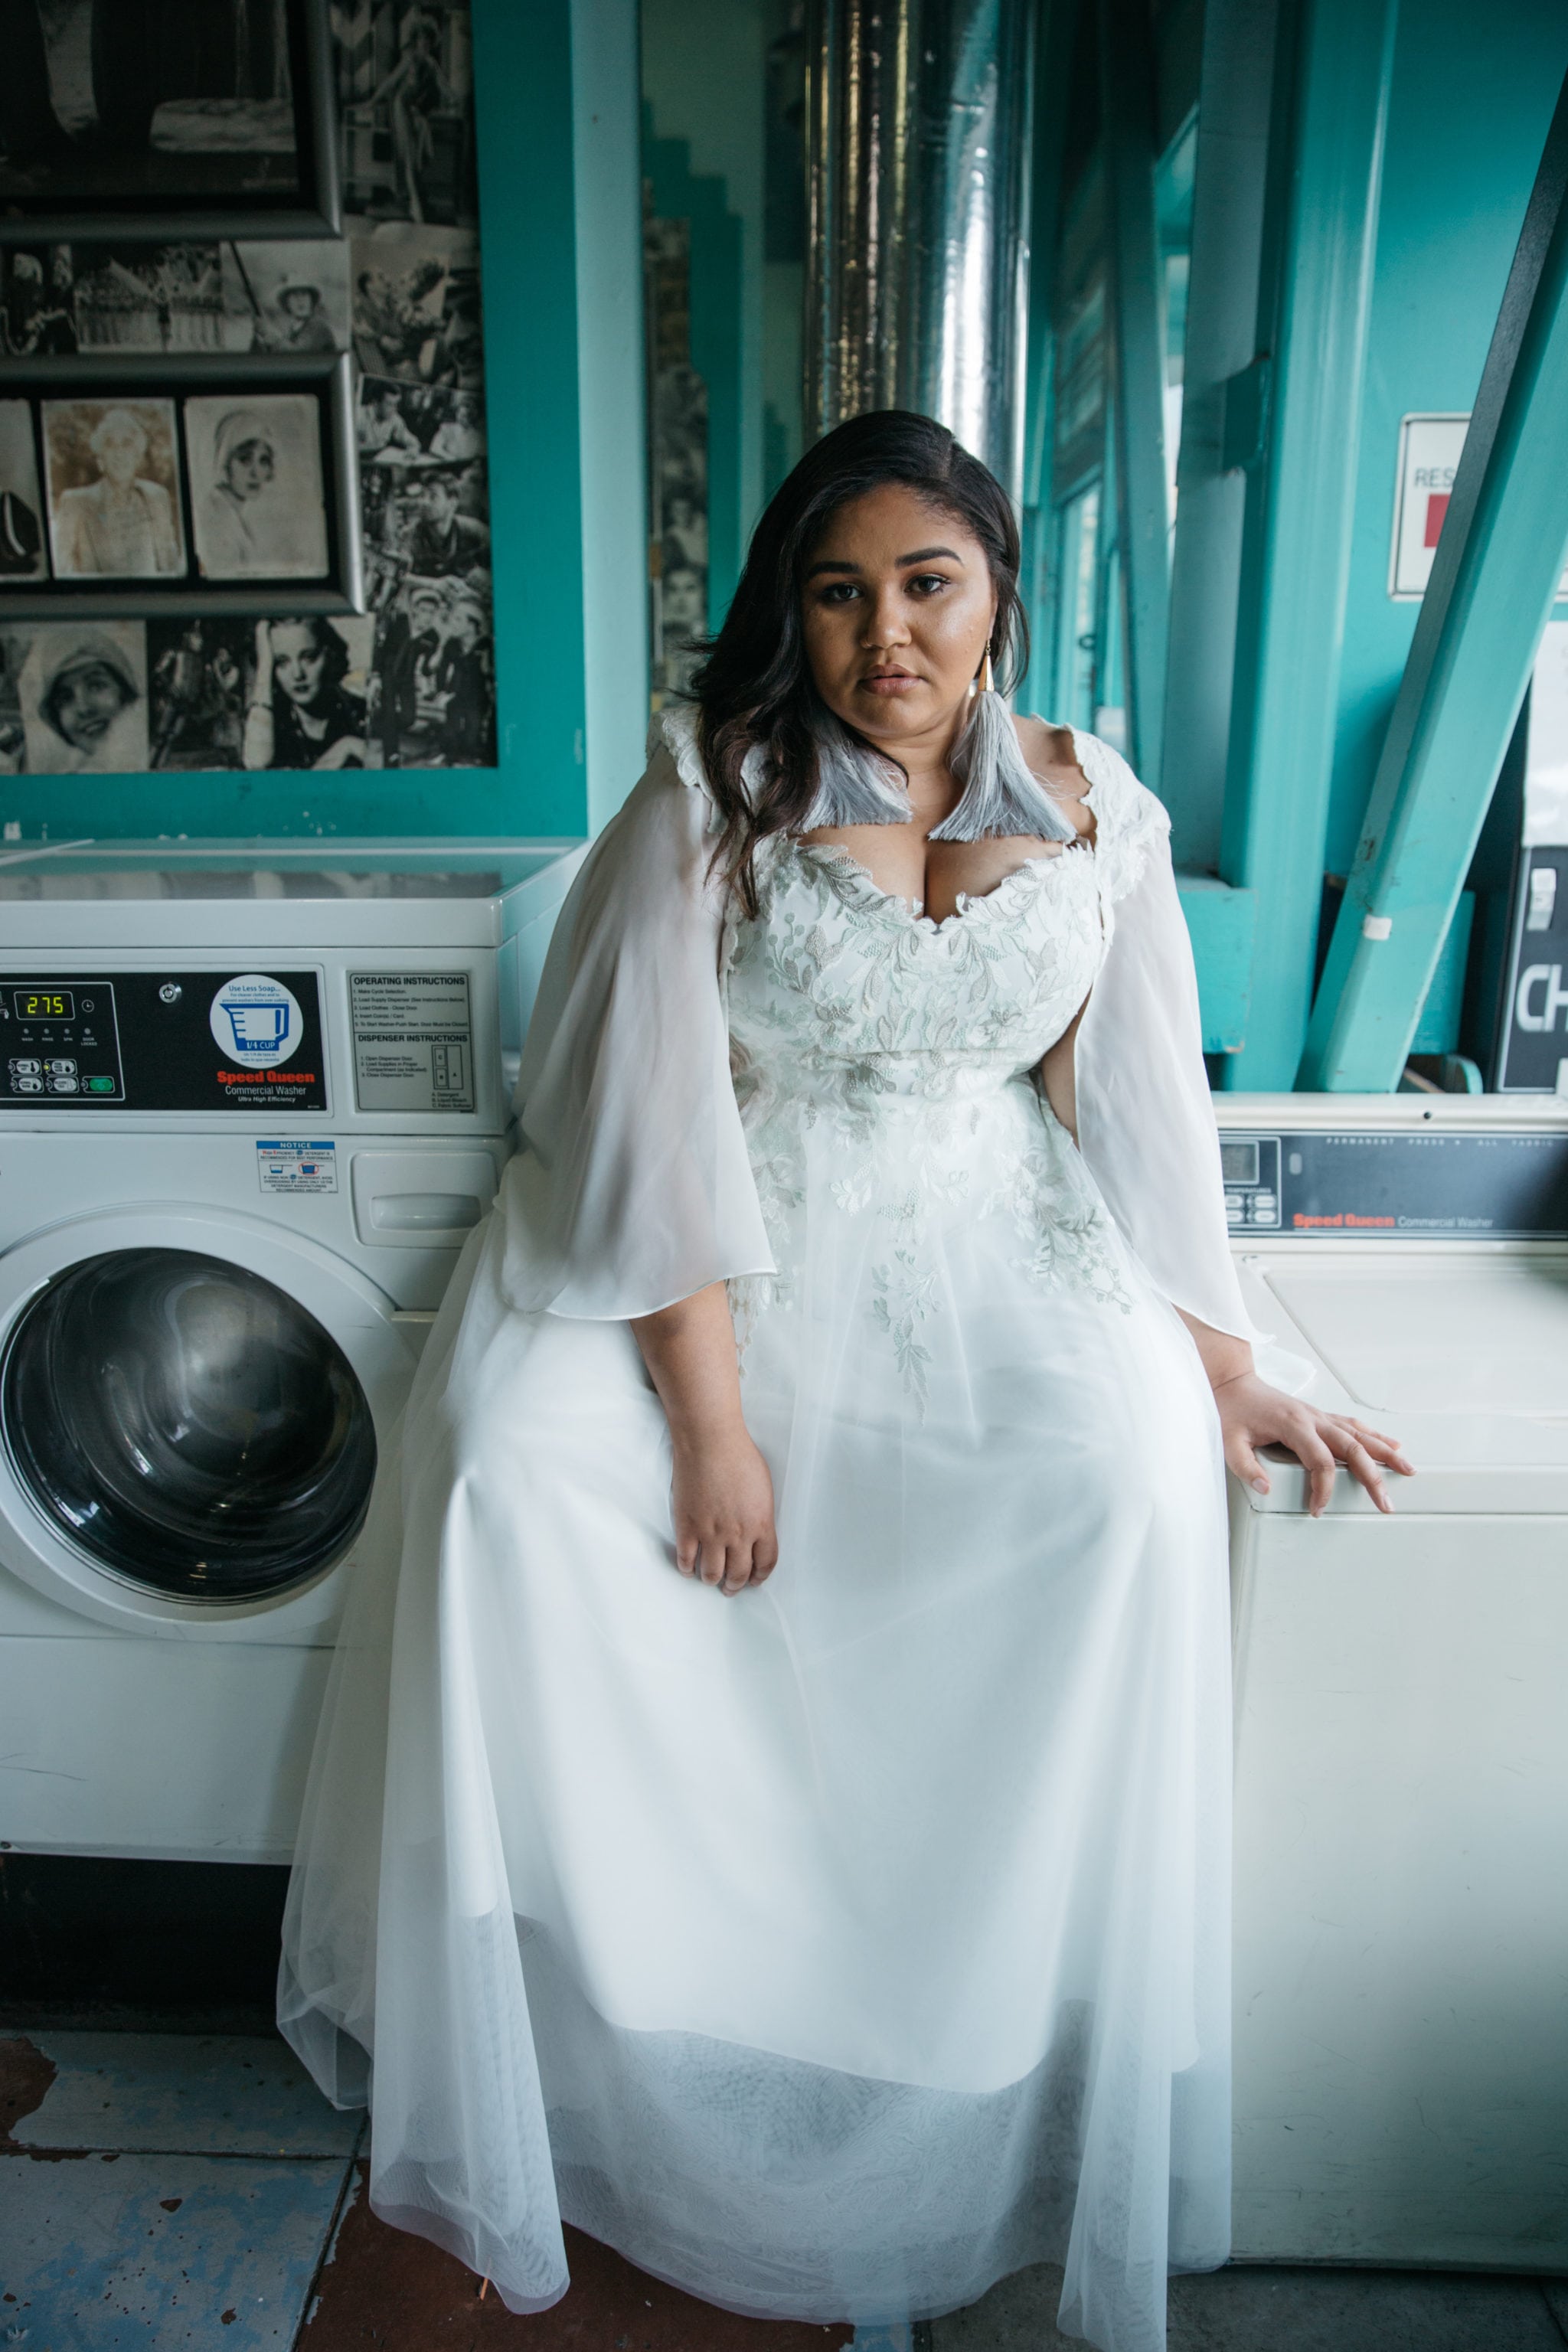 A woman wearing a plus size wedding dress and capelet from Lace and Liberty sits on a washing machine in a laundromat with teal walls